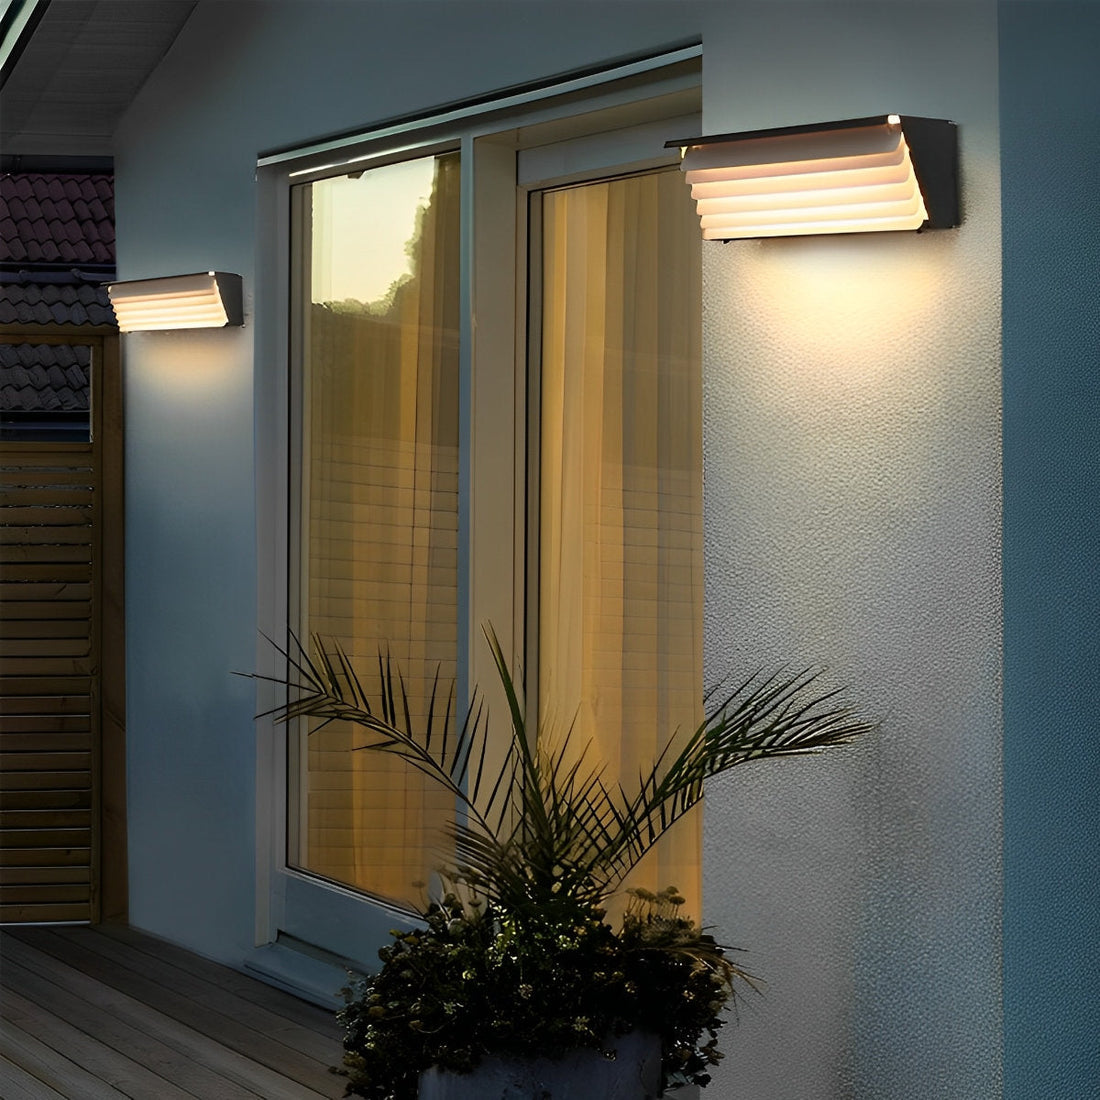 Creative Waterproof LED Modern Outdoor Wall Lamp Wall Sconce Lighting - Flyachilles